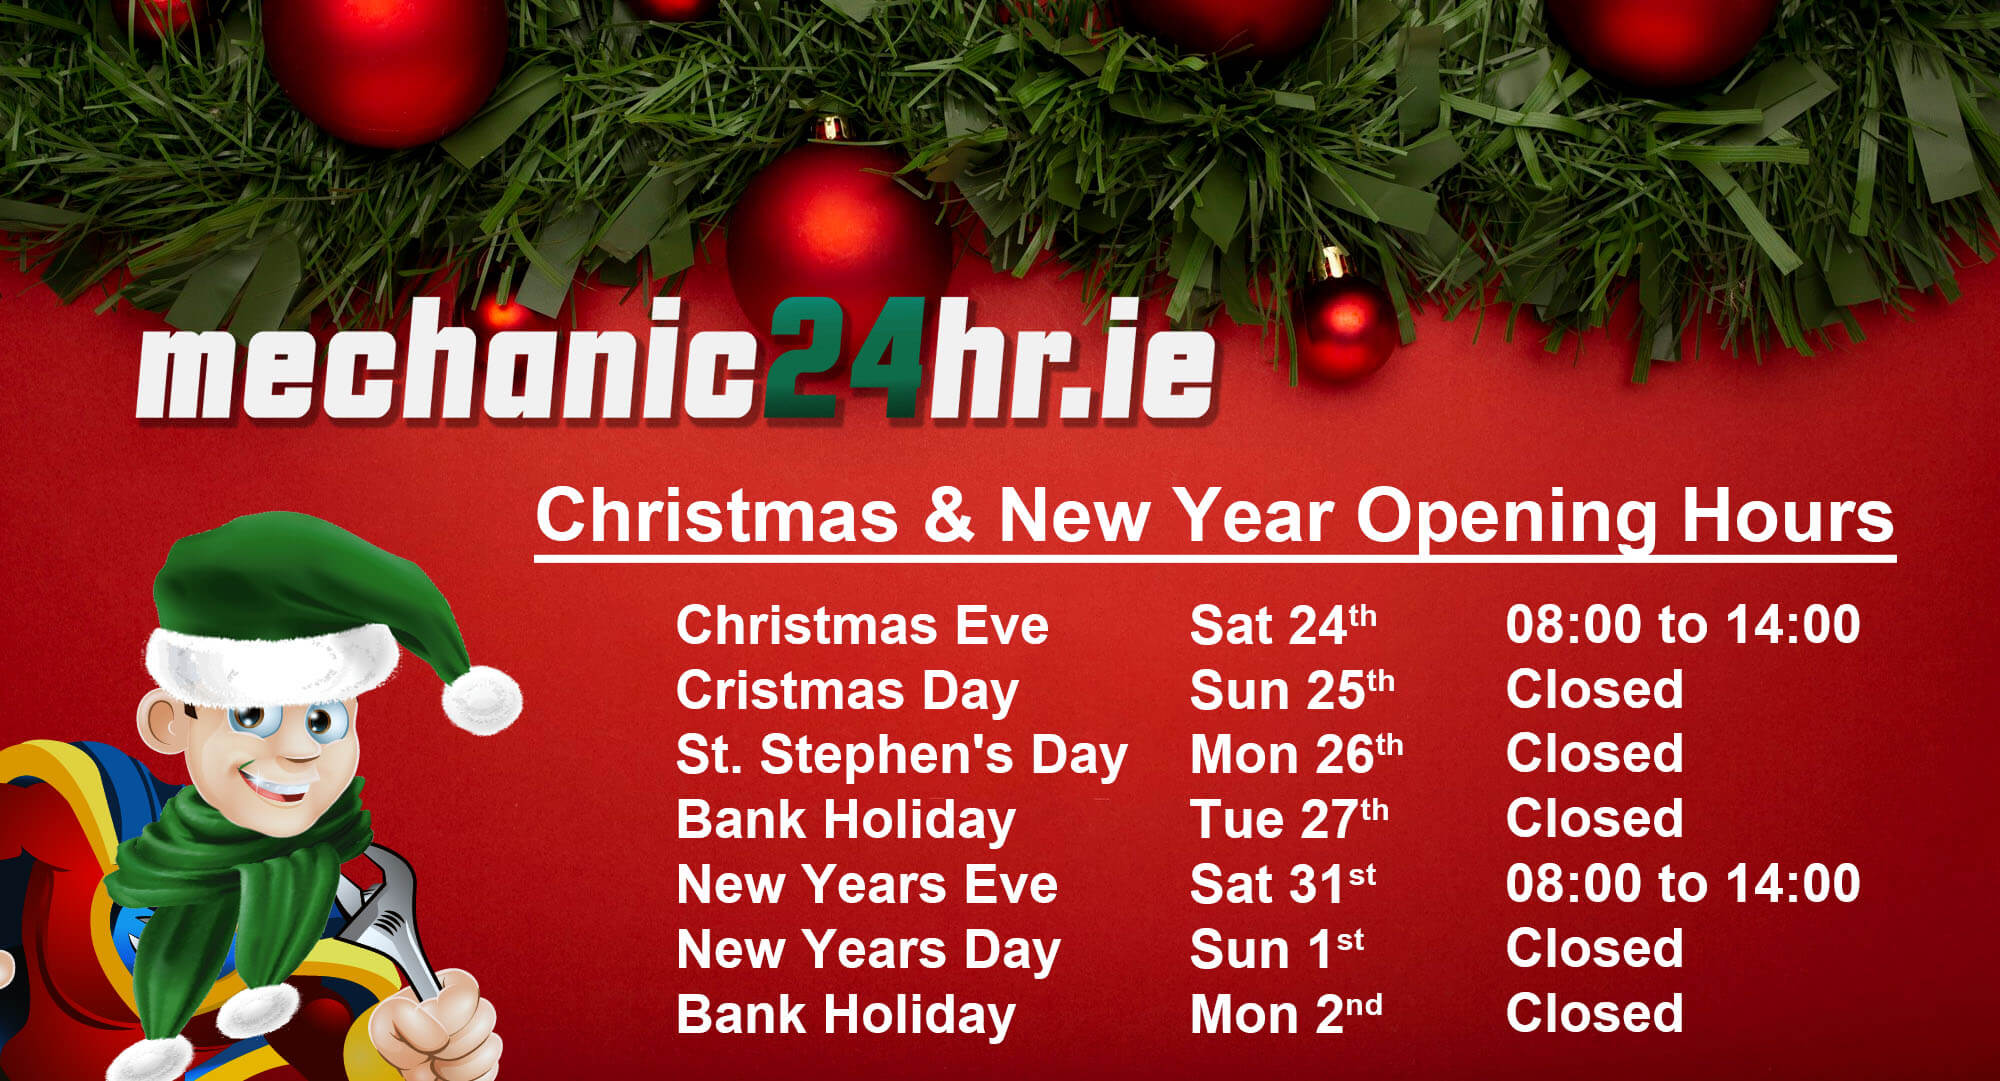 opening hours Christmas & new year